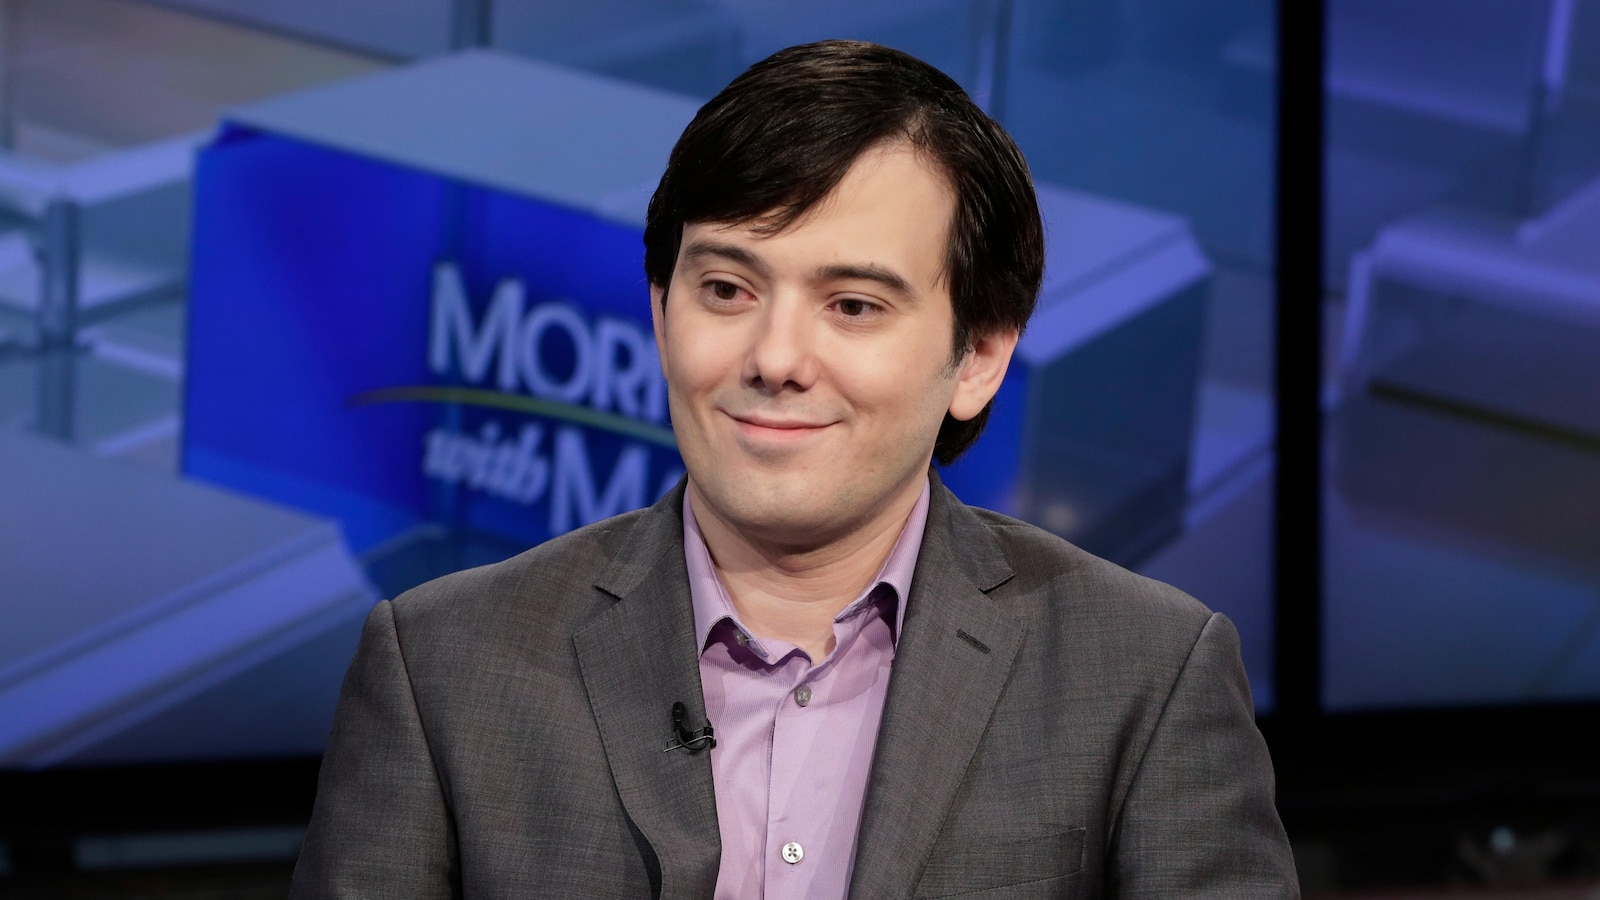 American investor Martin Shkreli is accused of copying and sharing a unique Wu-Tang Clan album